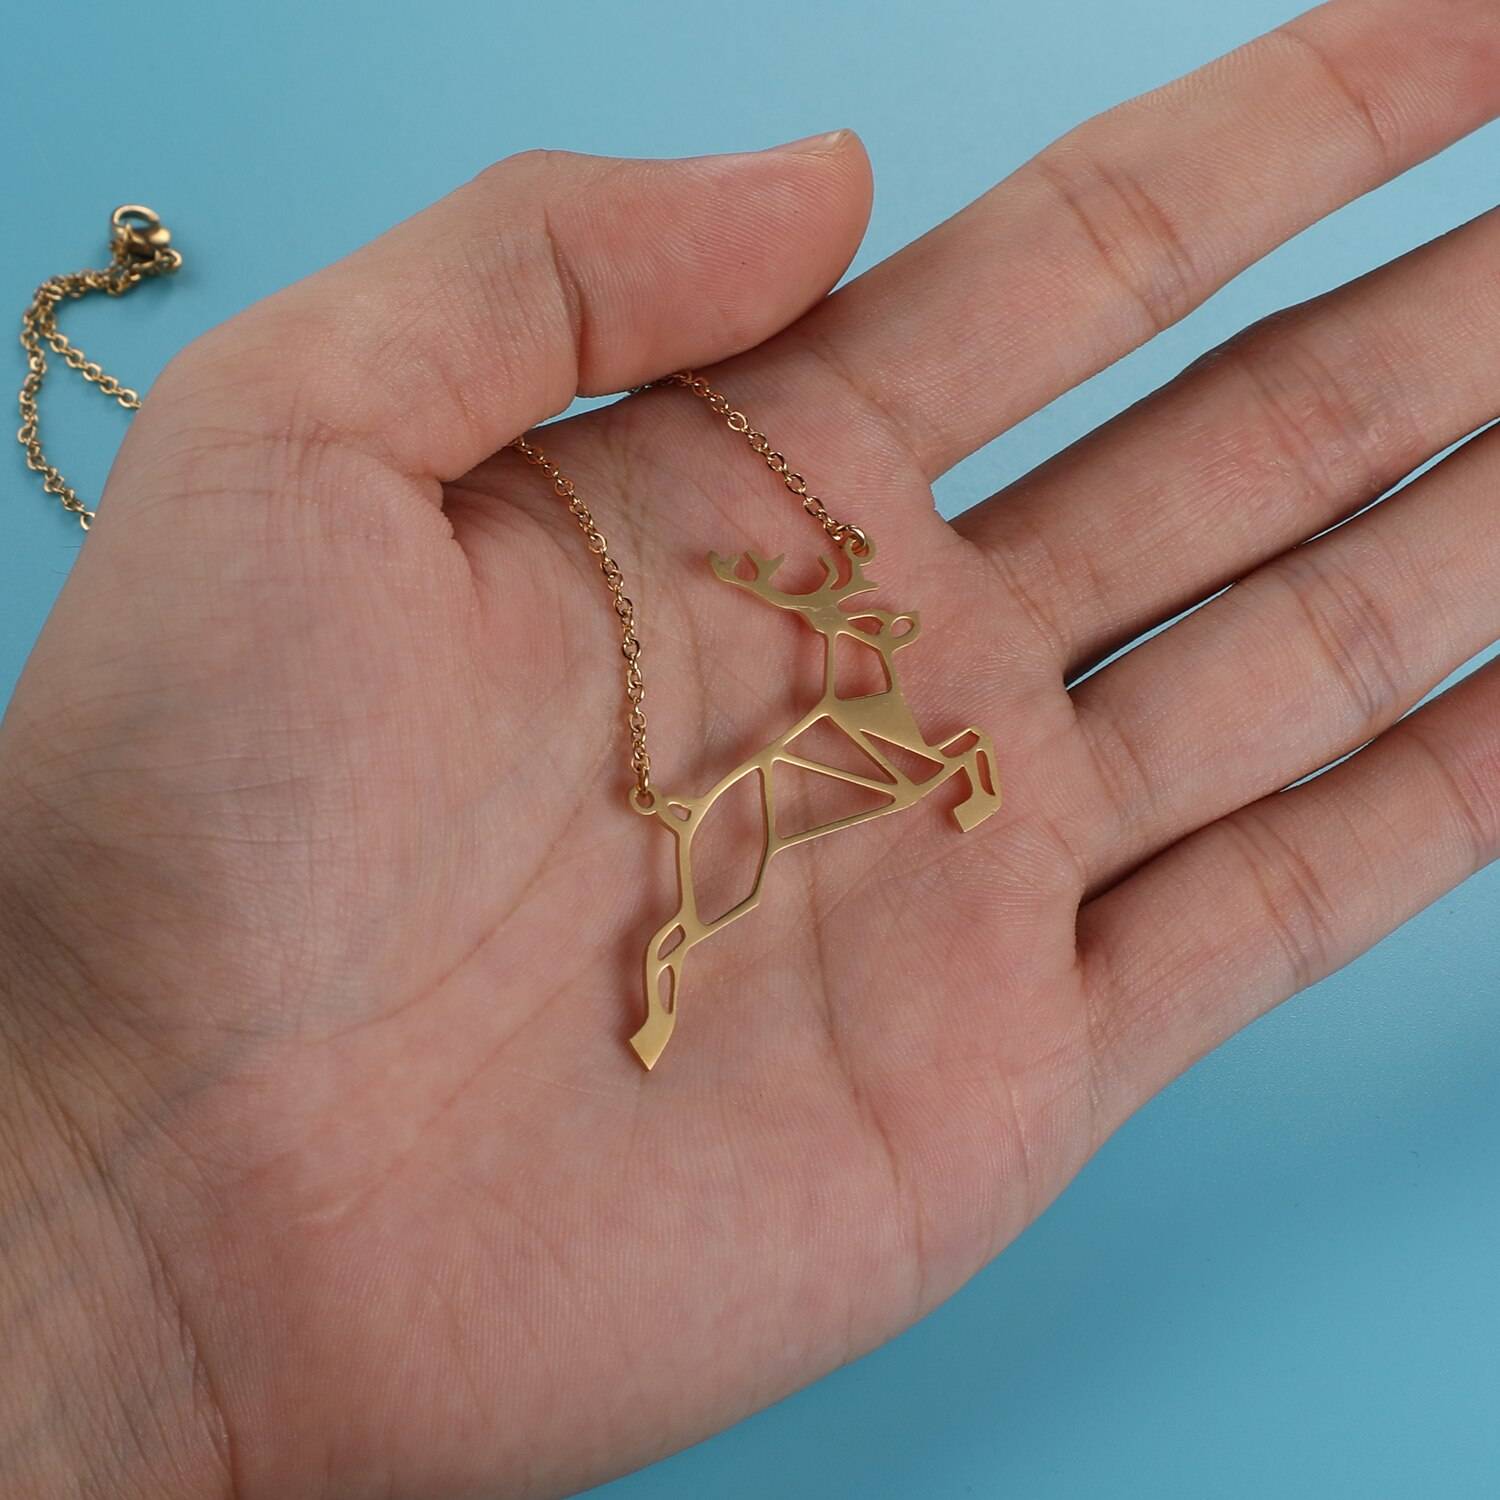 Galloping Deer Origami Necklace on hand